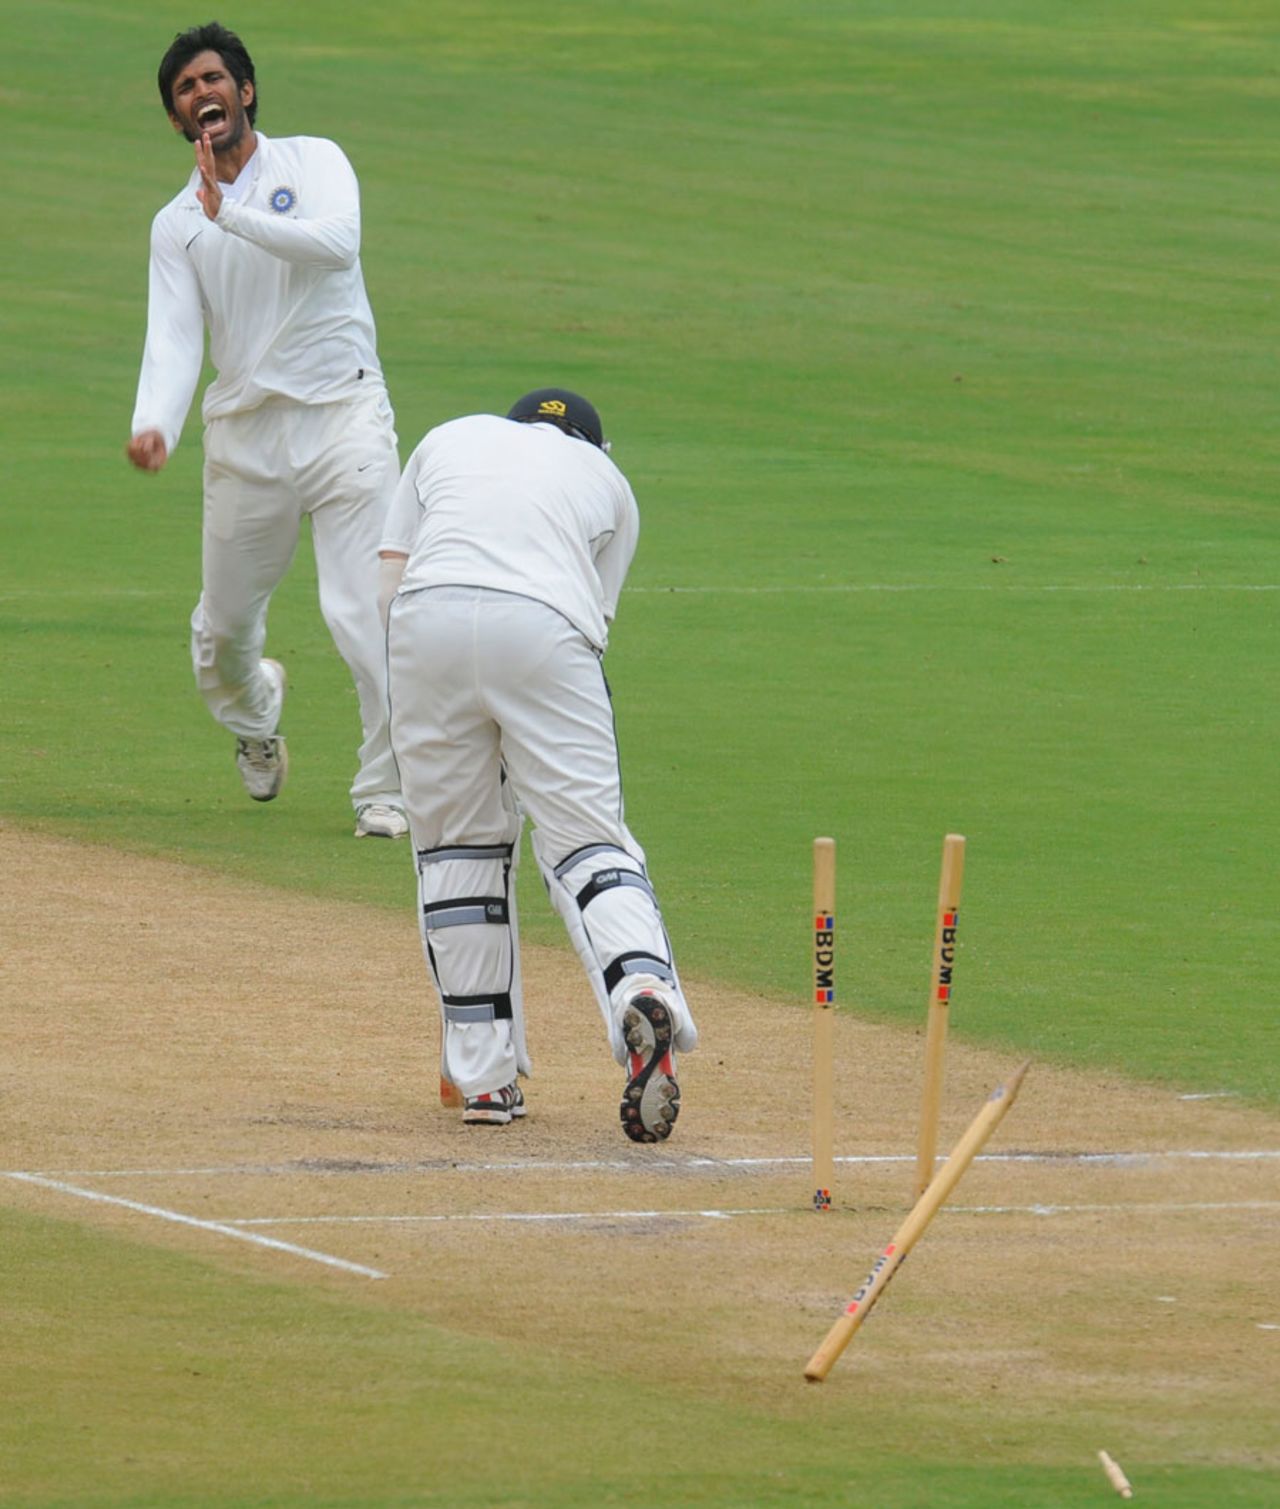 Abhishek Nayar cries in delight after knocking over Doug Bracewell's middle stump, India A v New Zealand A, 2nd unofficial Test, Visakhapatnam, Sep 3, 2013